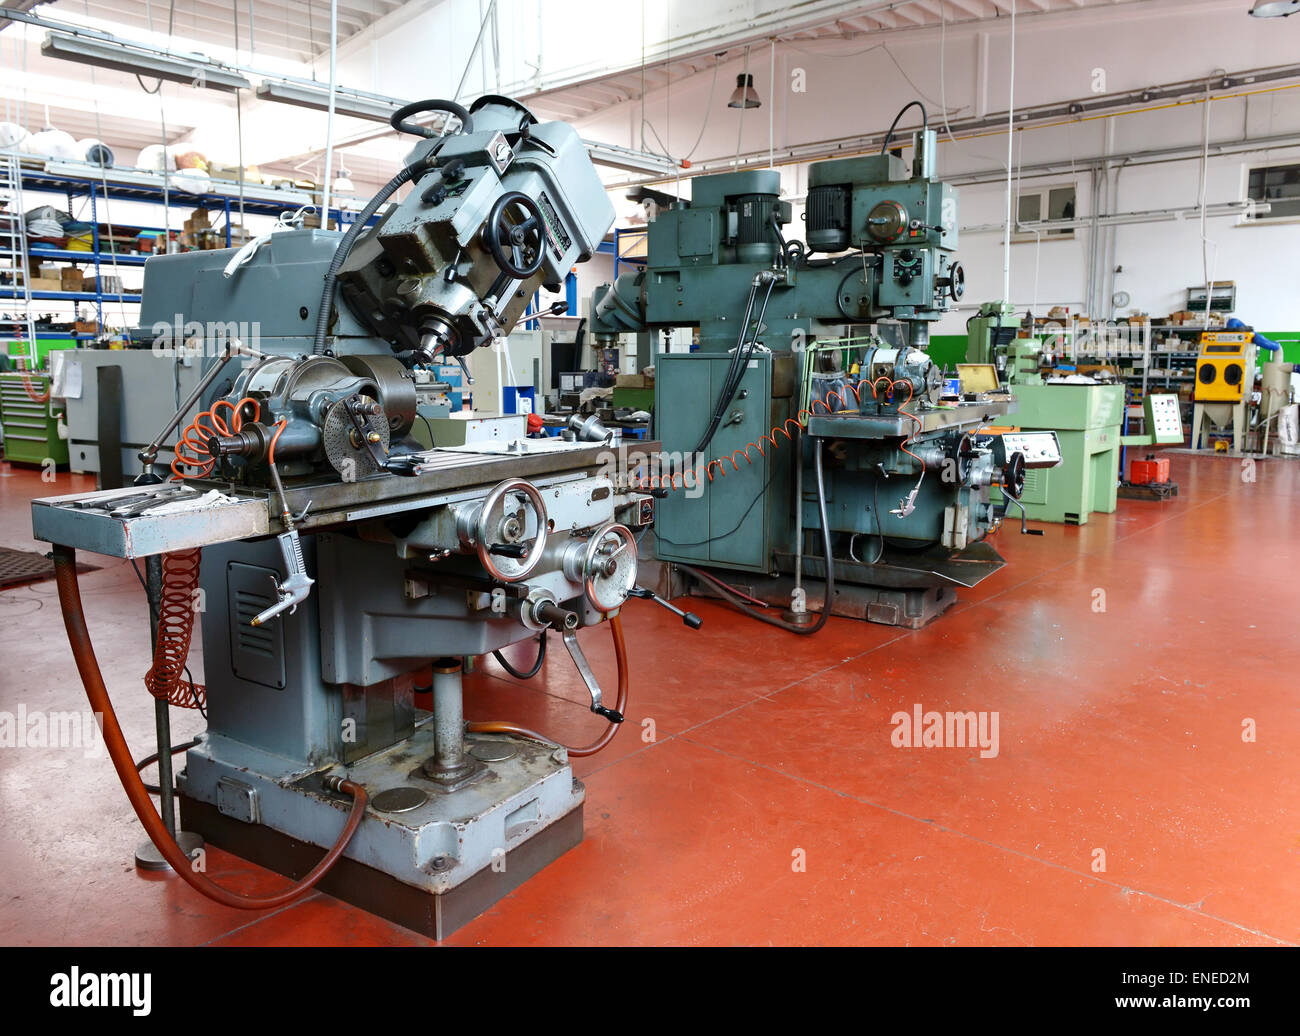 Large Automated Machines in Interior of Mechanic Laboratory with Polished Floor Stock Photo